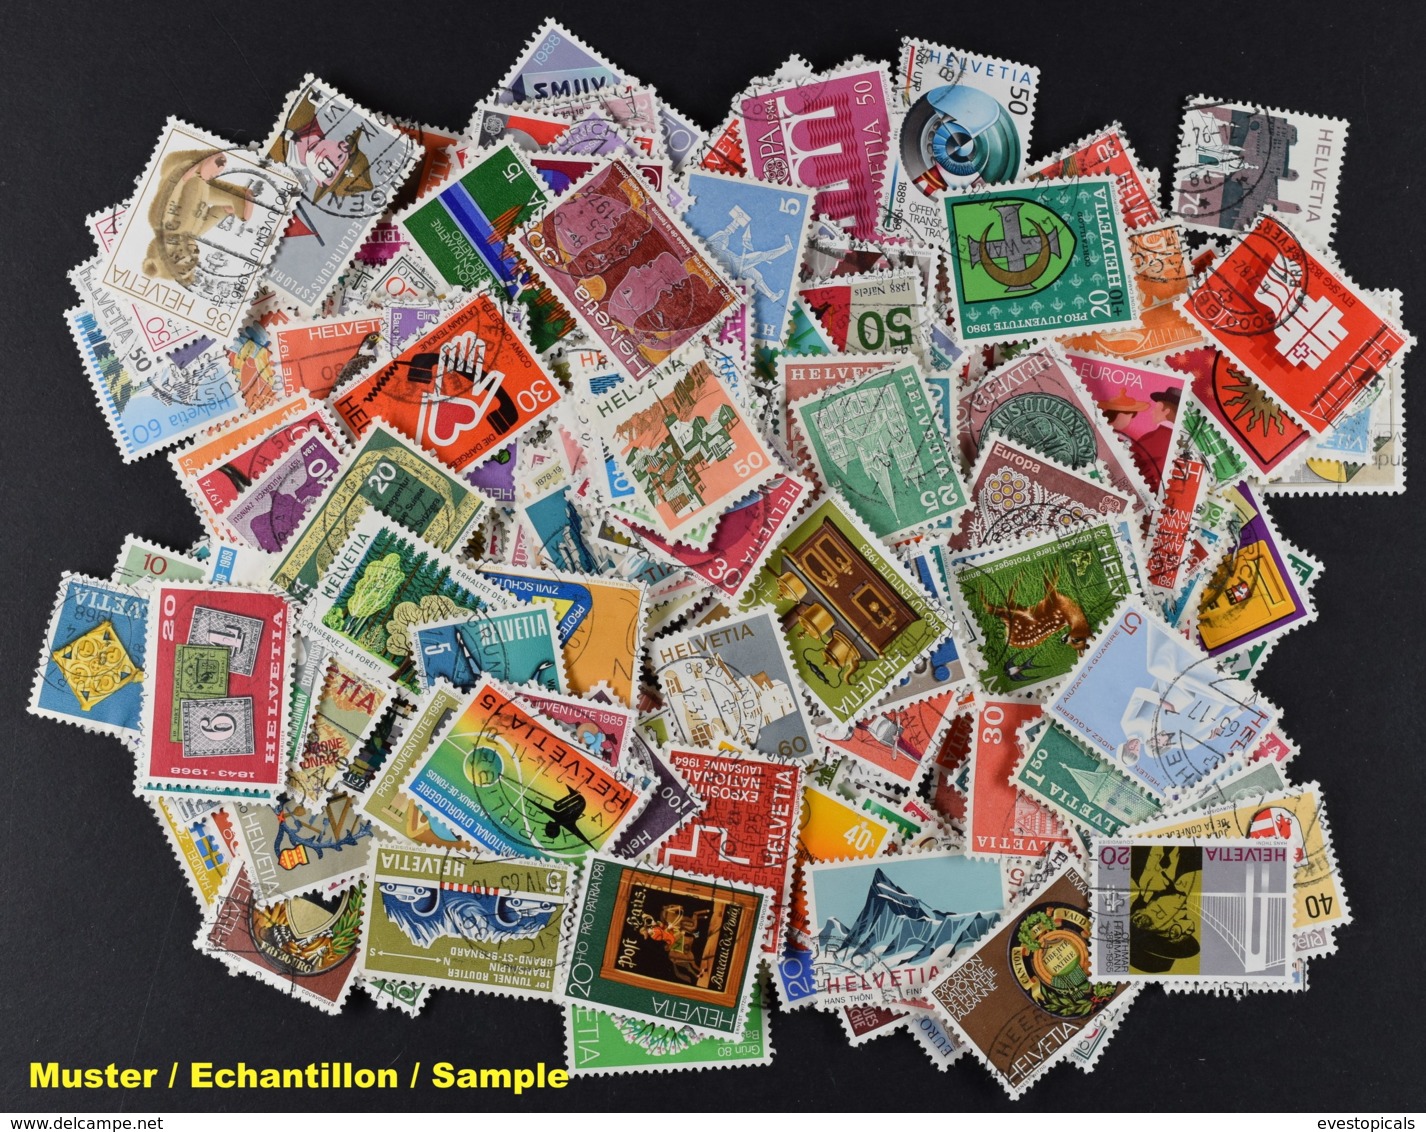 SWITZERLAND, 300 DIFFERENT STAMPS - Collections (sans Albums)